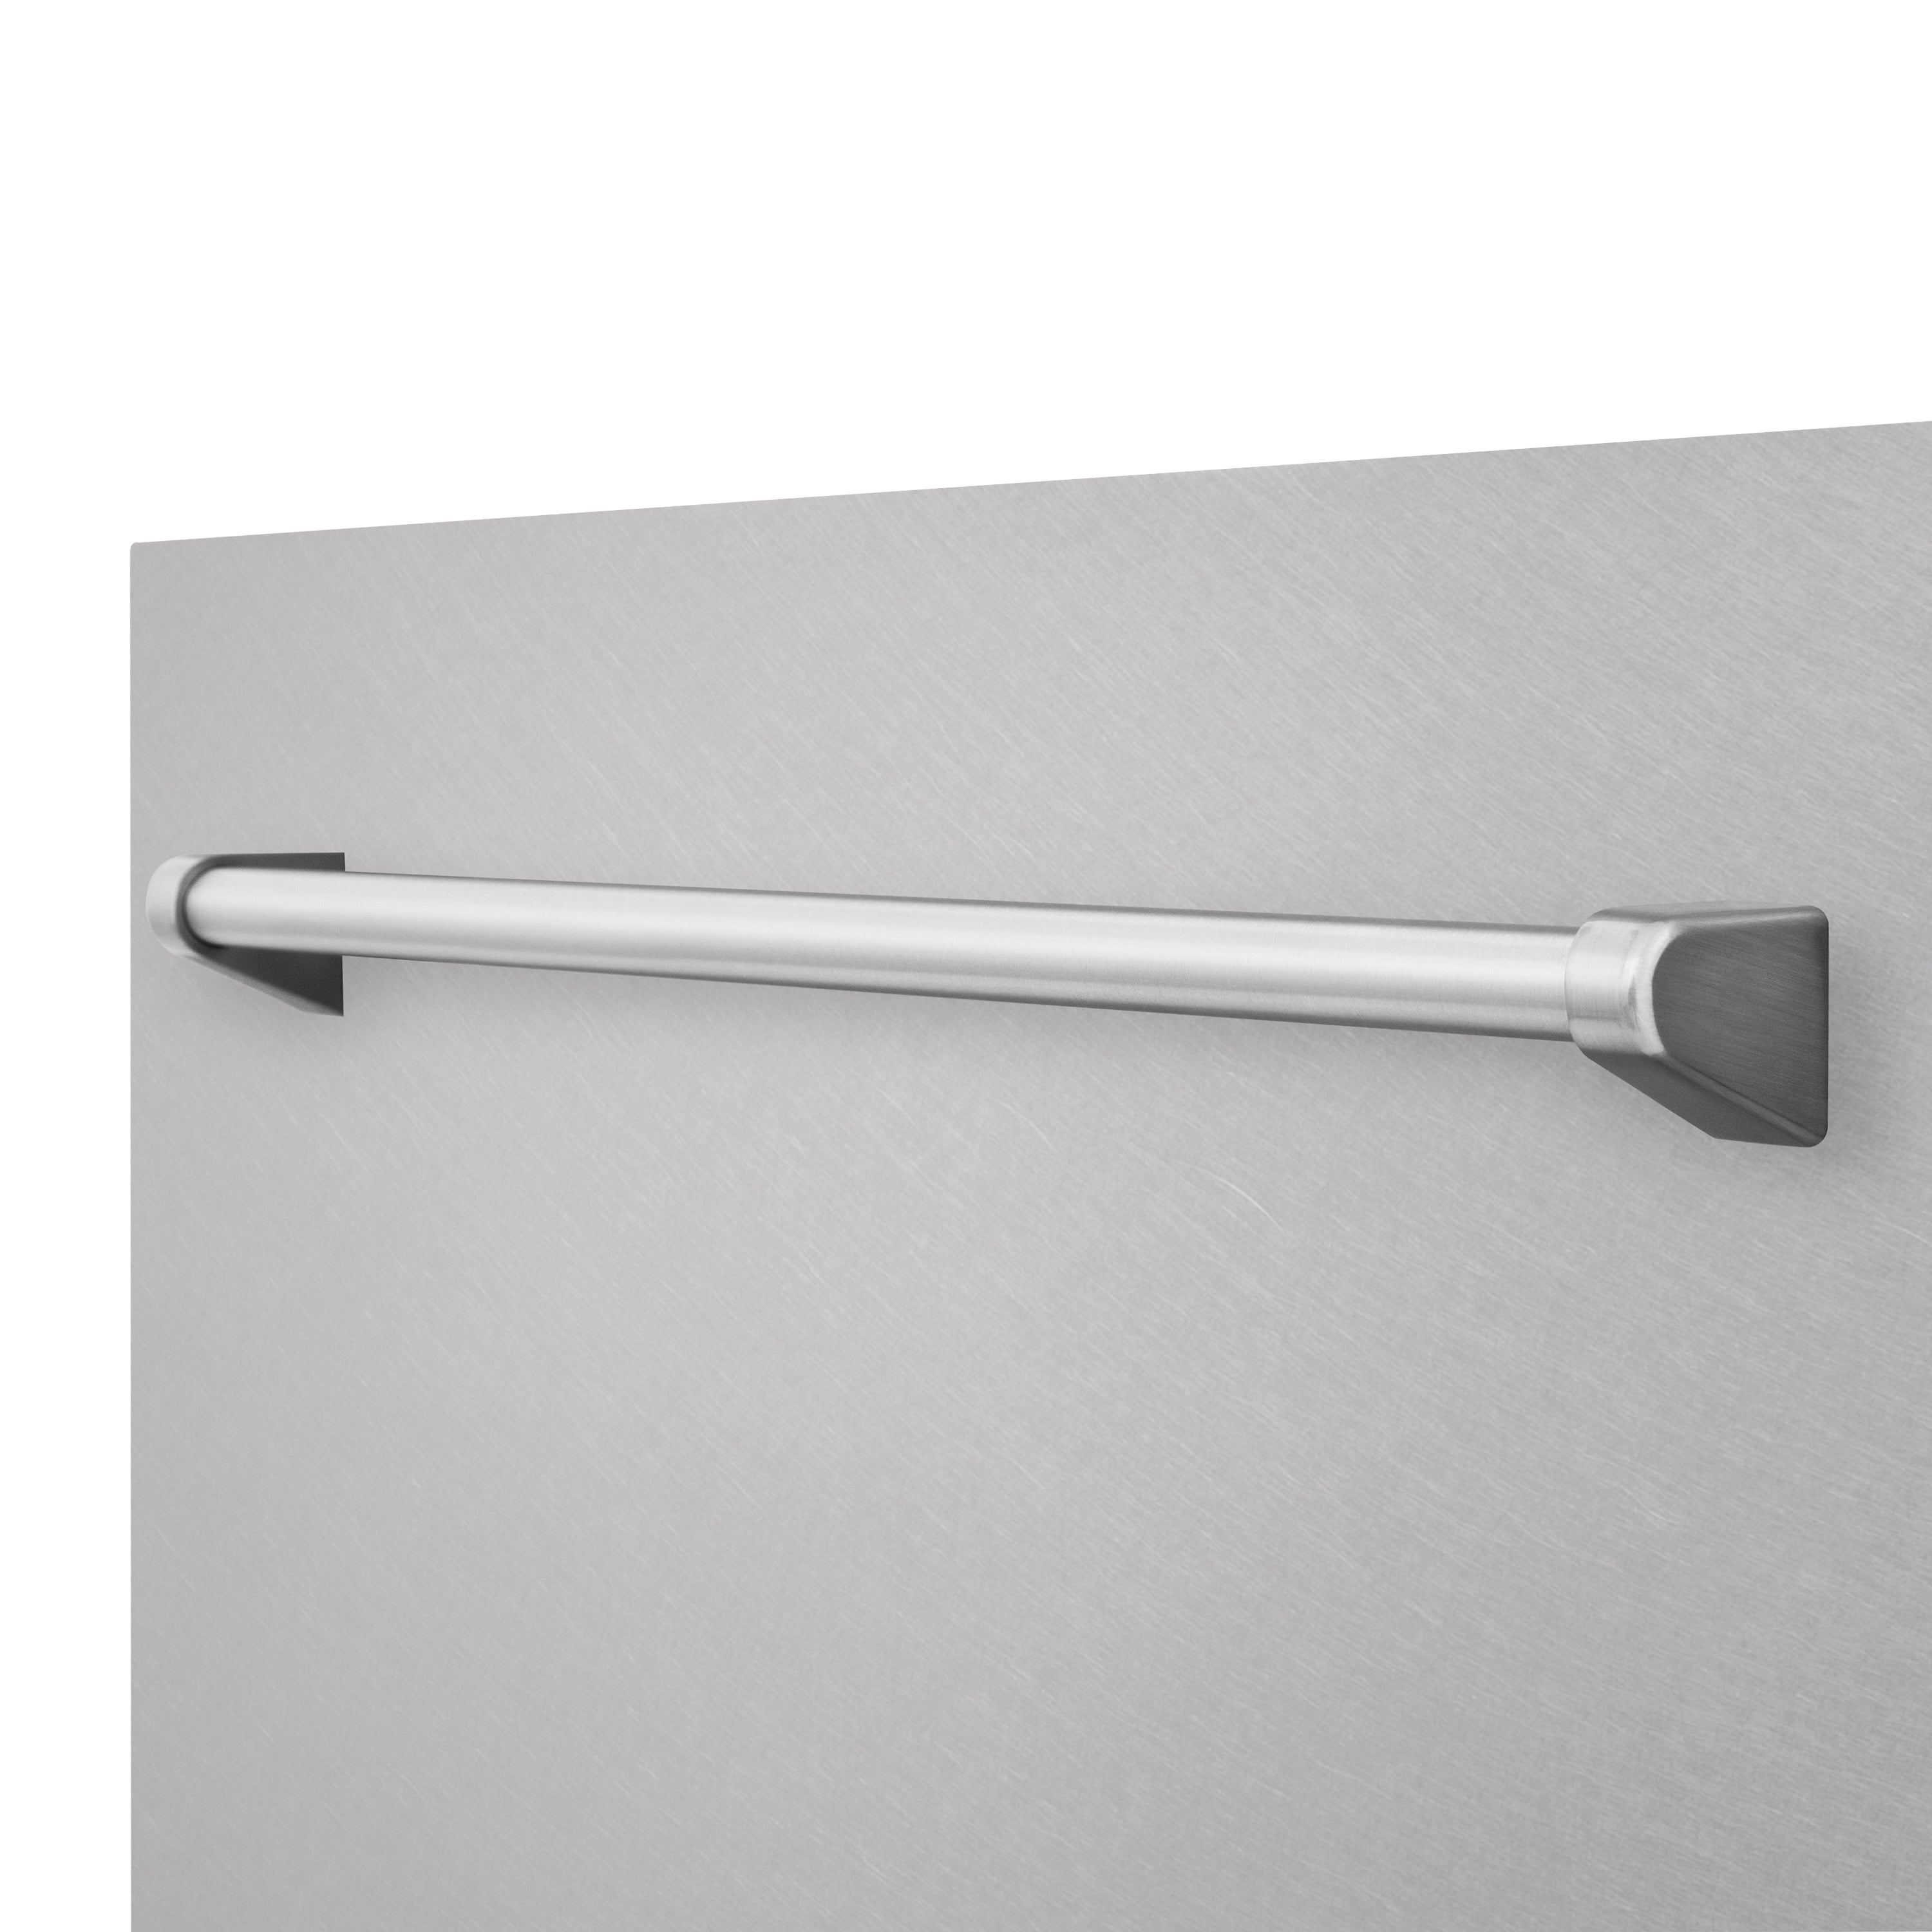 ZLINE 24" Tallac Dishwasher Panel in Fingerprint Resistant Stainless Steel with Traditional Handle (DPV-SN-24)